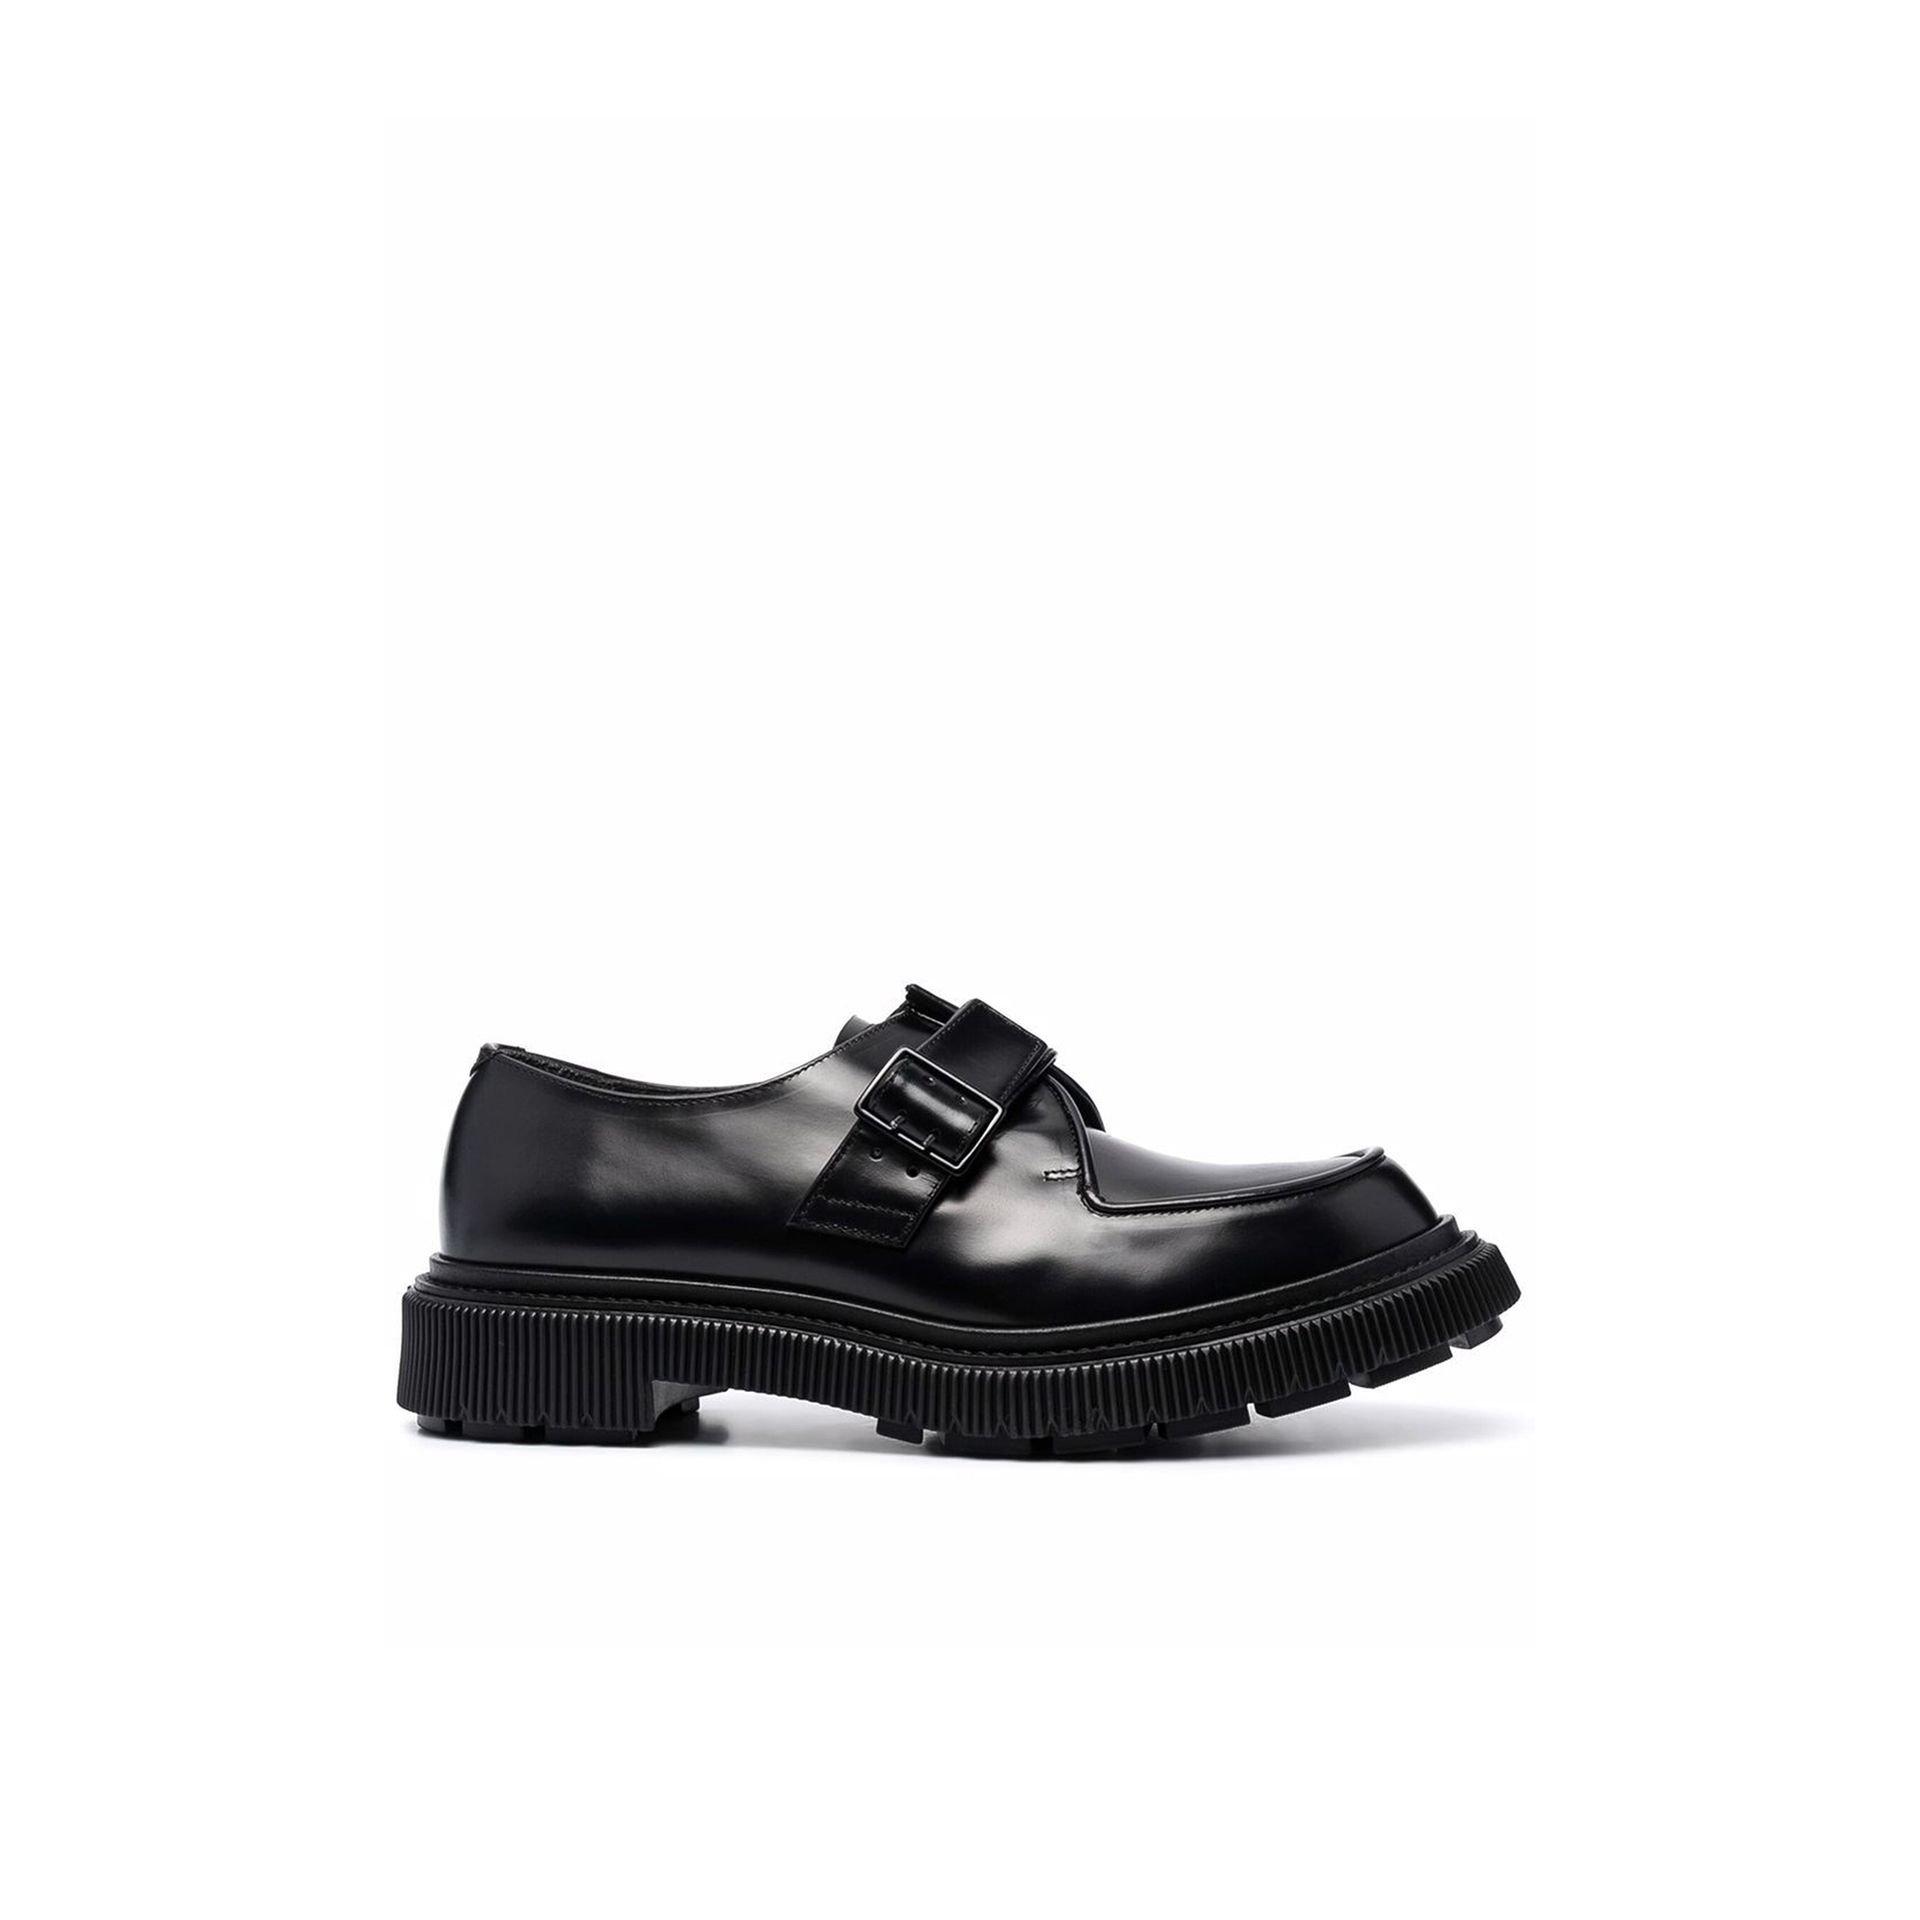 Adieu Type 136 Buckle Derby Shoes - Men's - Calf Leather/rubber in ...